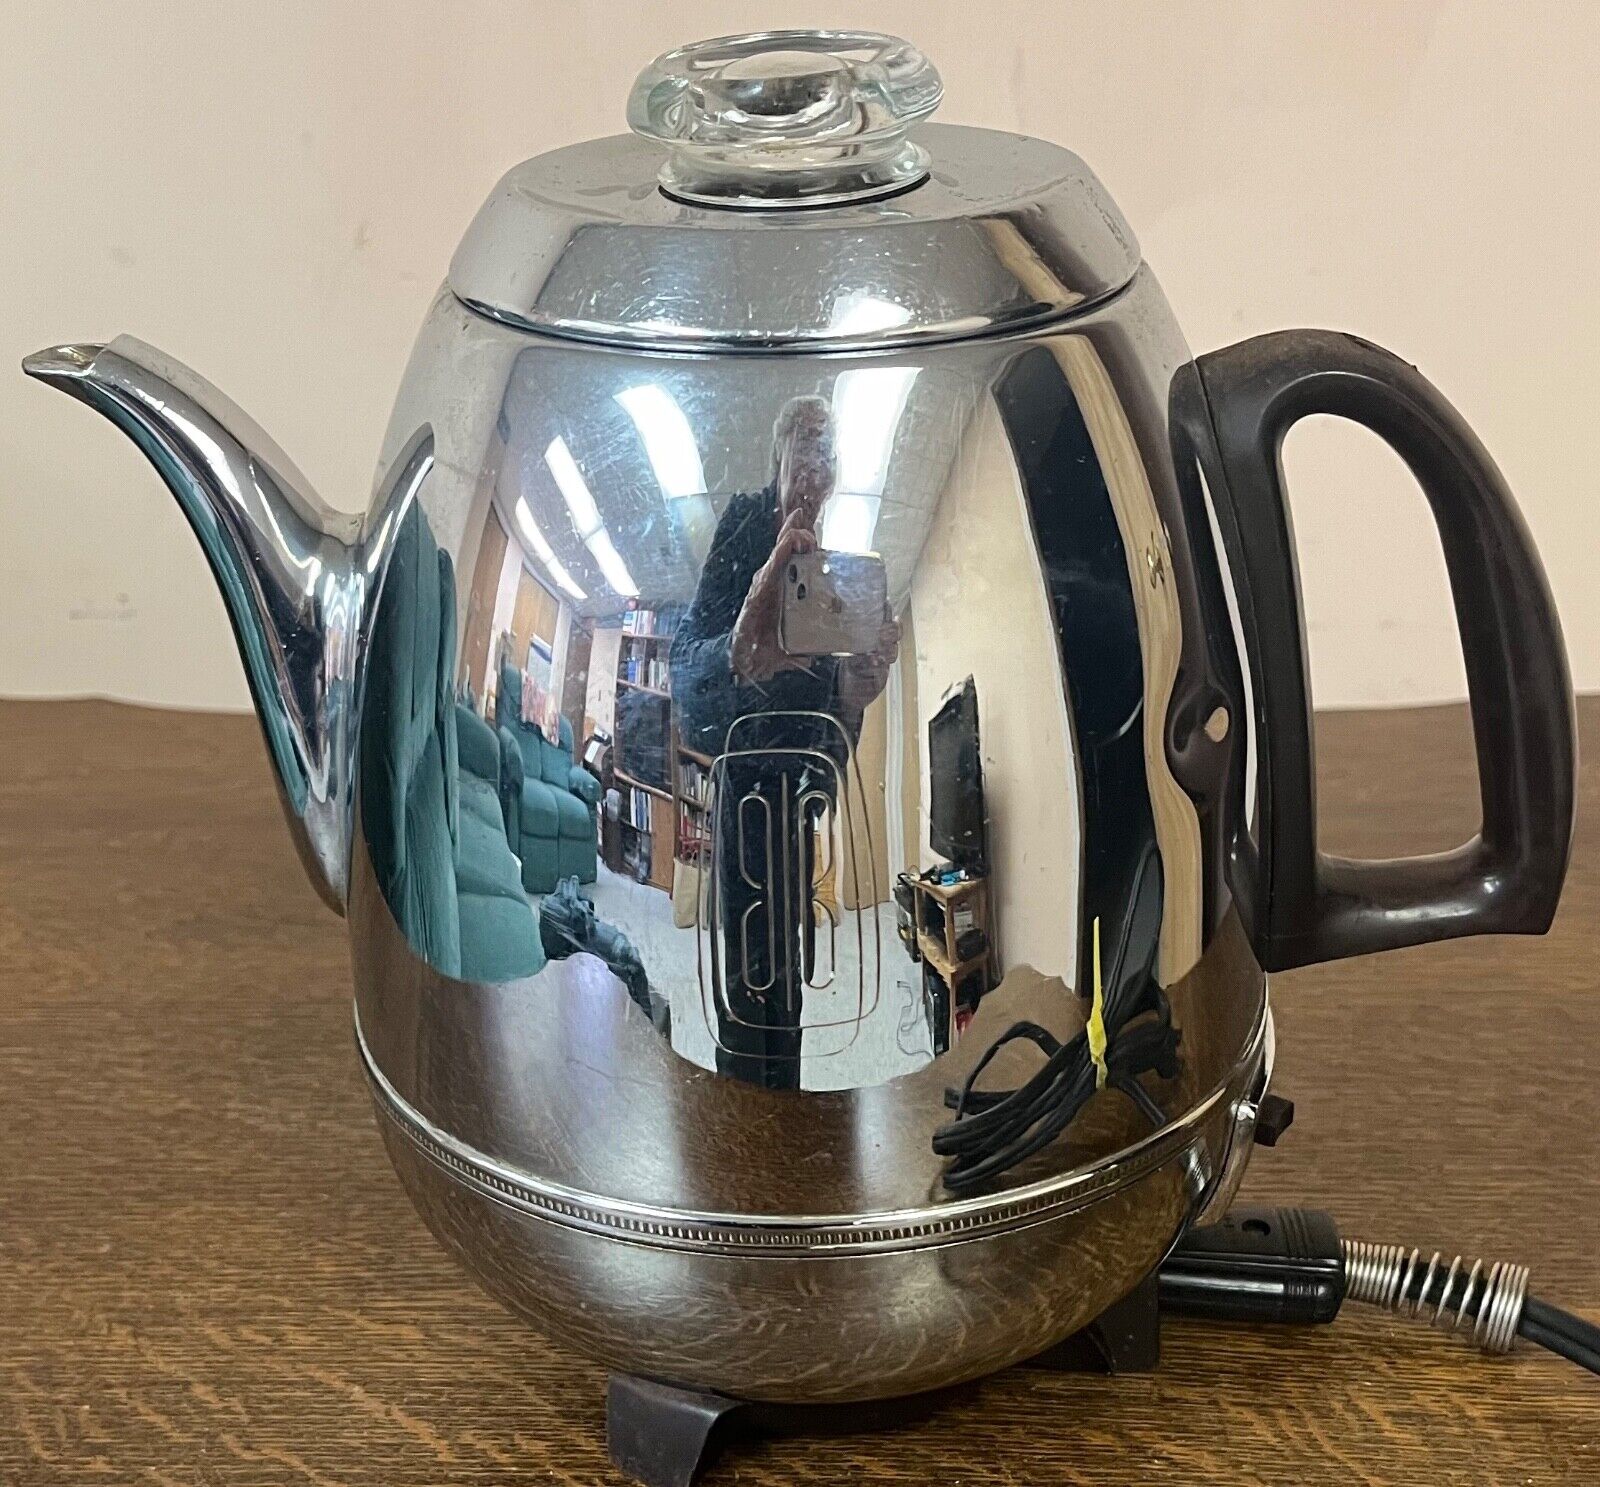 General Electric Automatic Percolator 33P30 Pot Belly Chrome 1960's